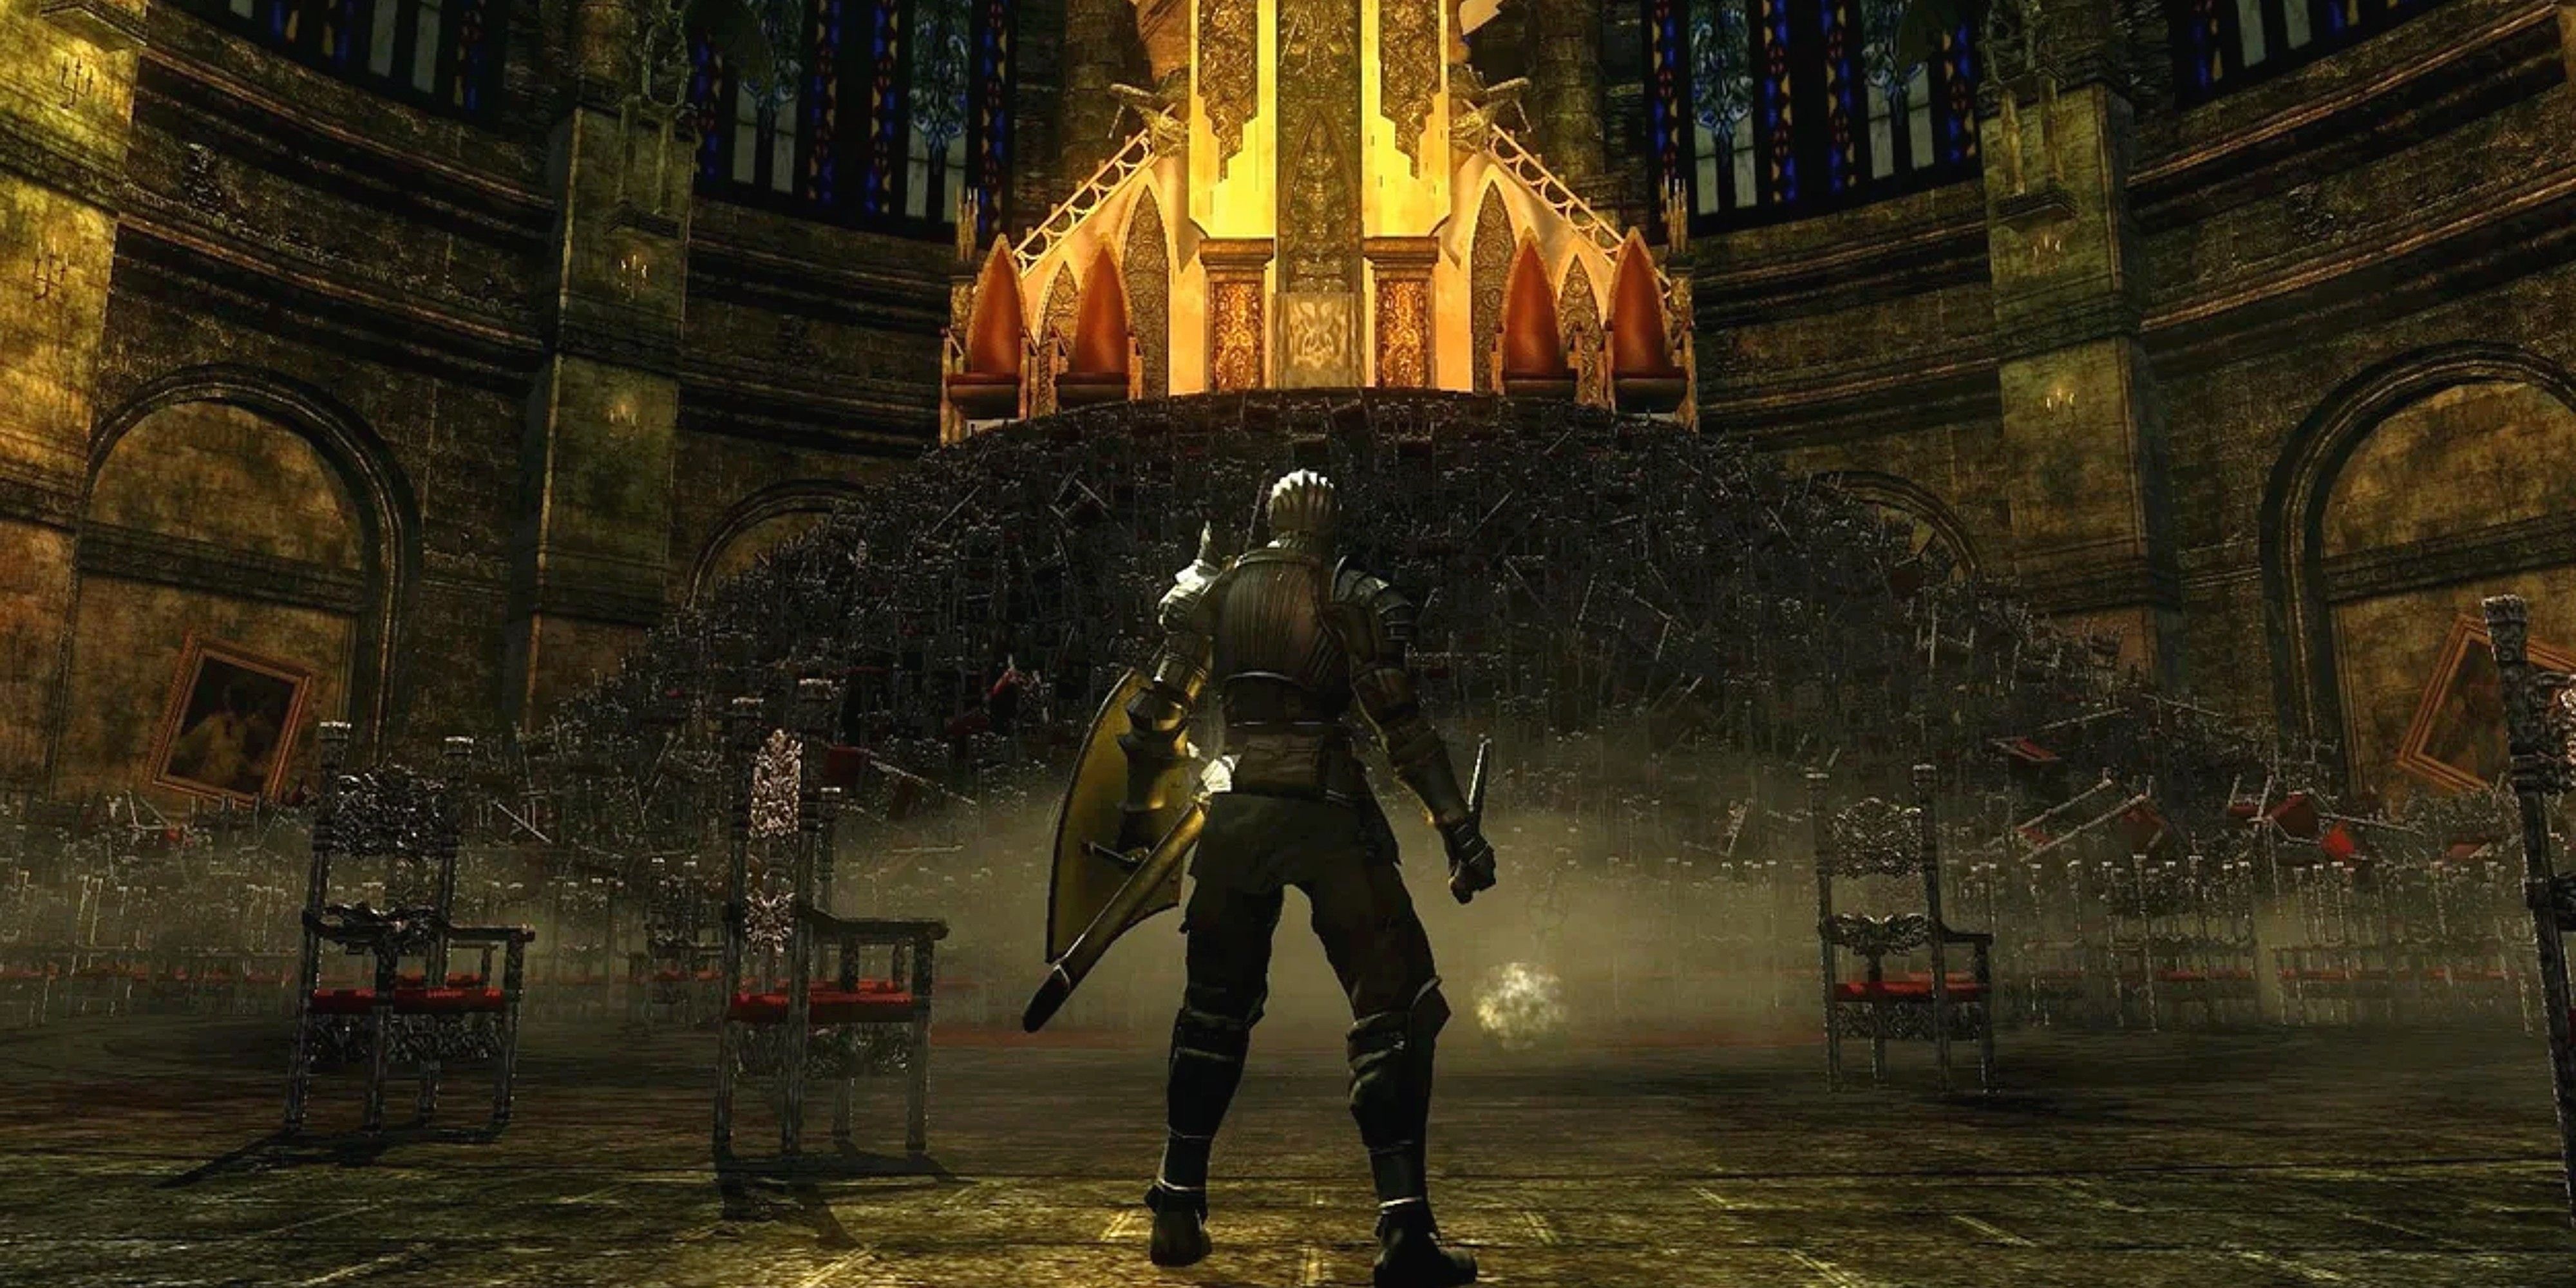 Demon's Souls Original Game Graphics from PS3